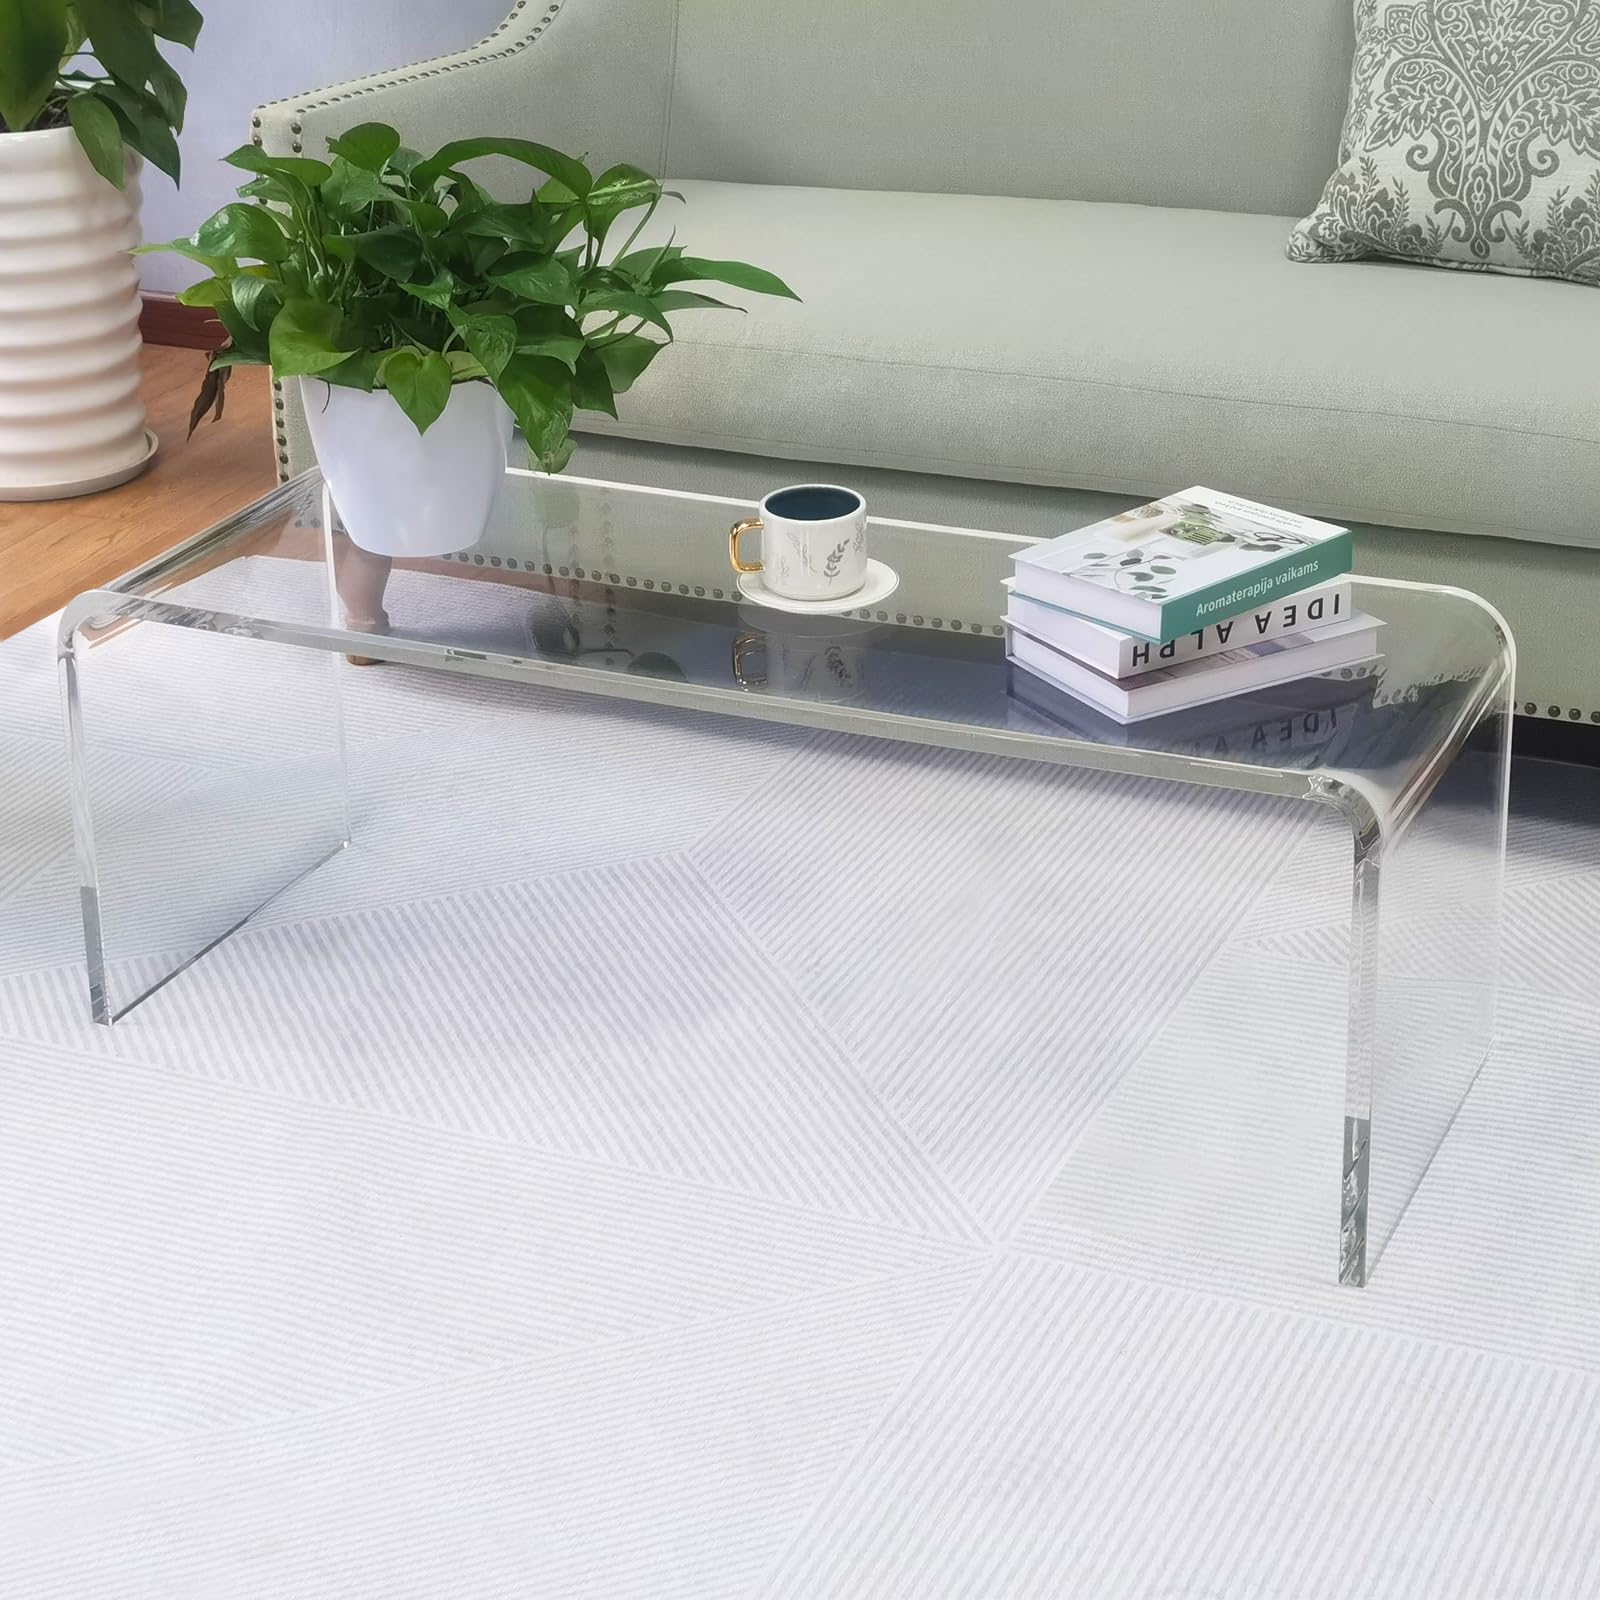 NEJHC Acrylic Coffee Table, 44" x 16" x 16" x 4/5'' Thick Clear Modern All Acrylic Waterfall Living Room Tables